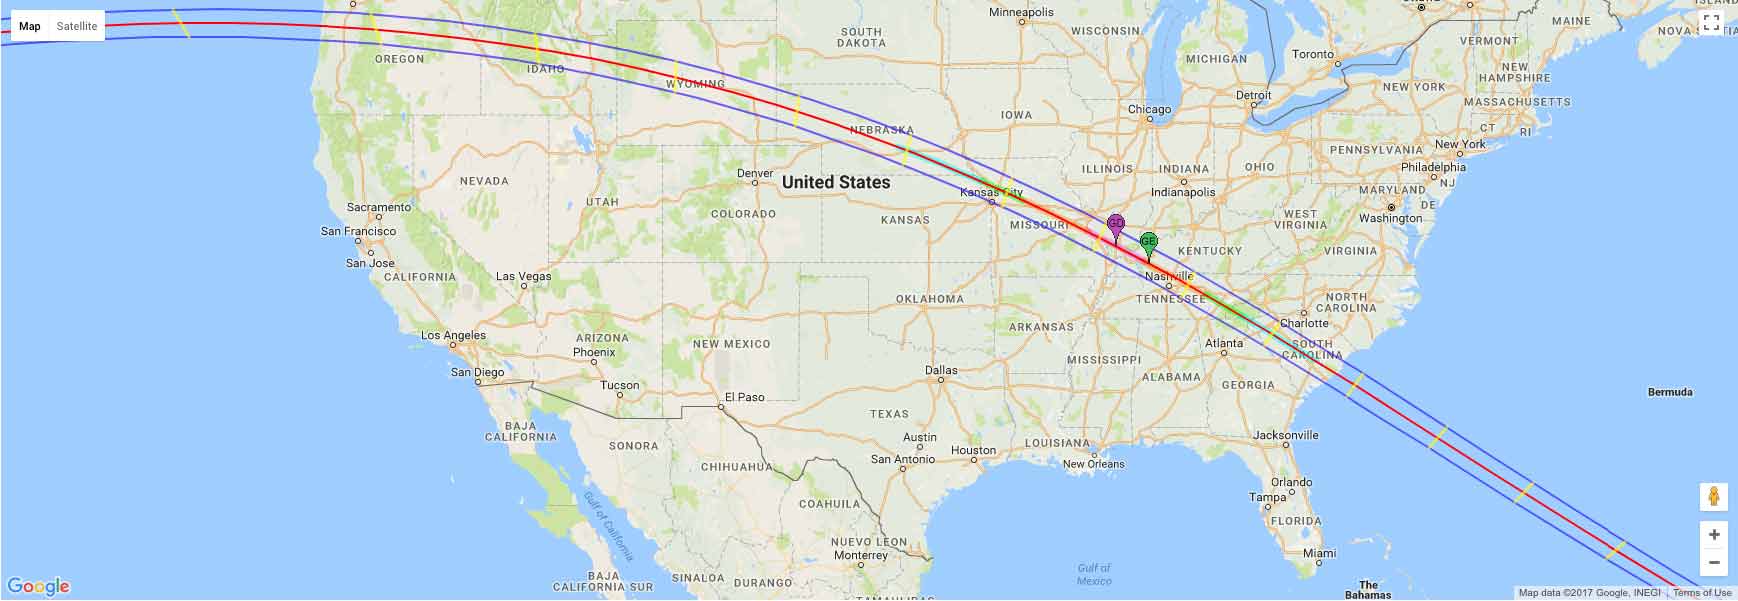 image showing us map during total solar eclipse